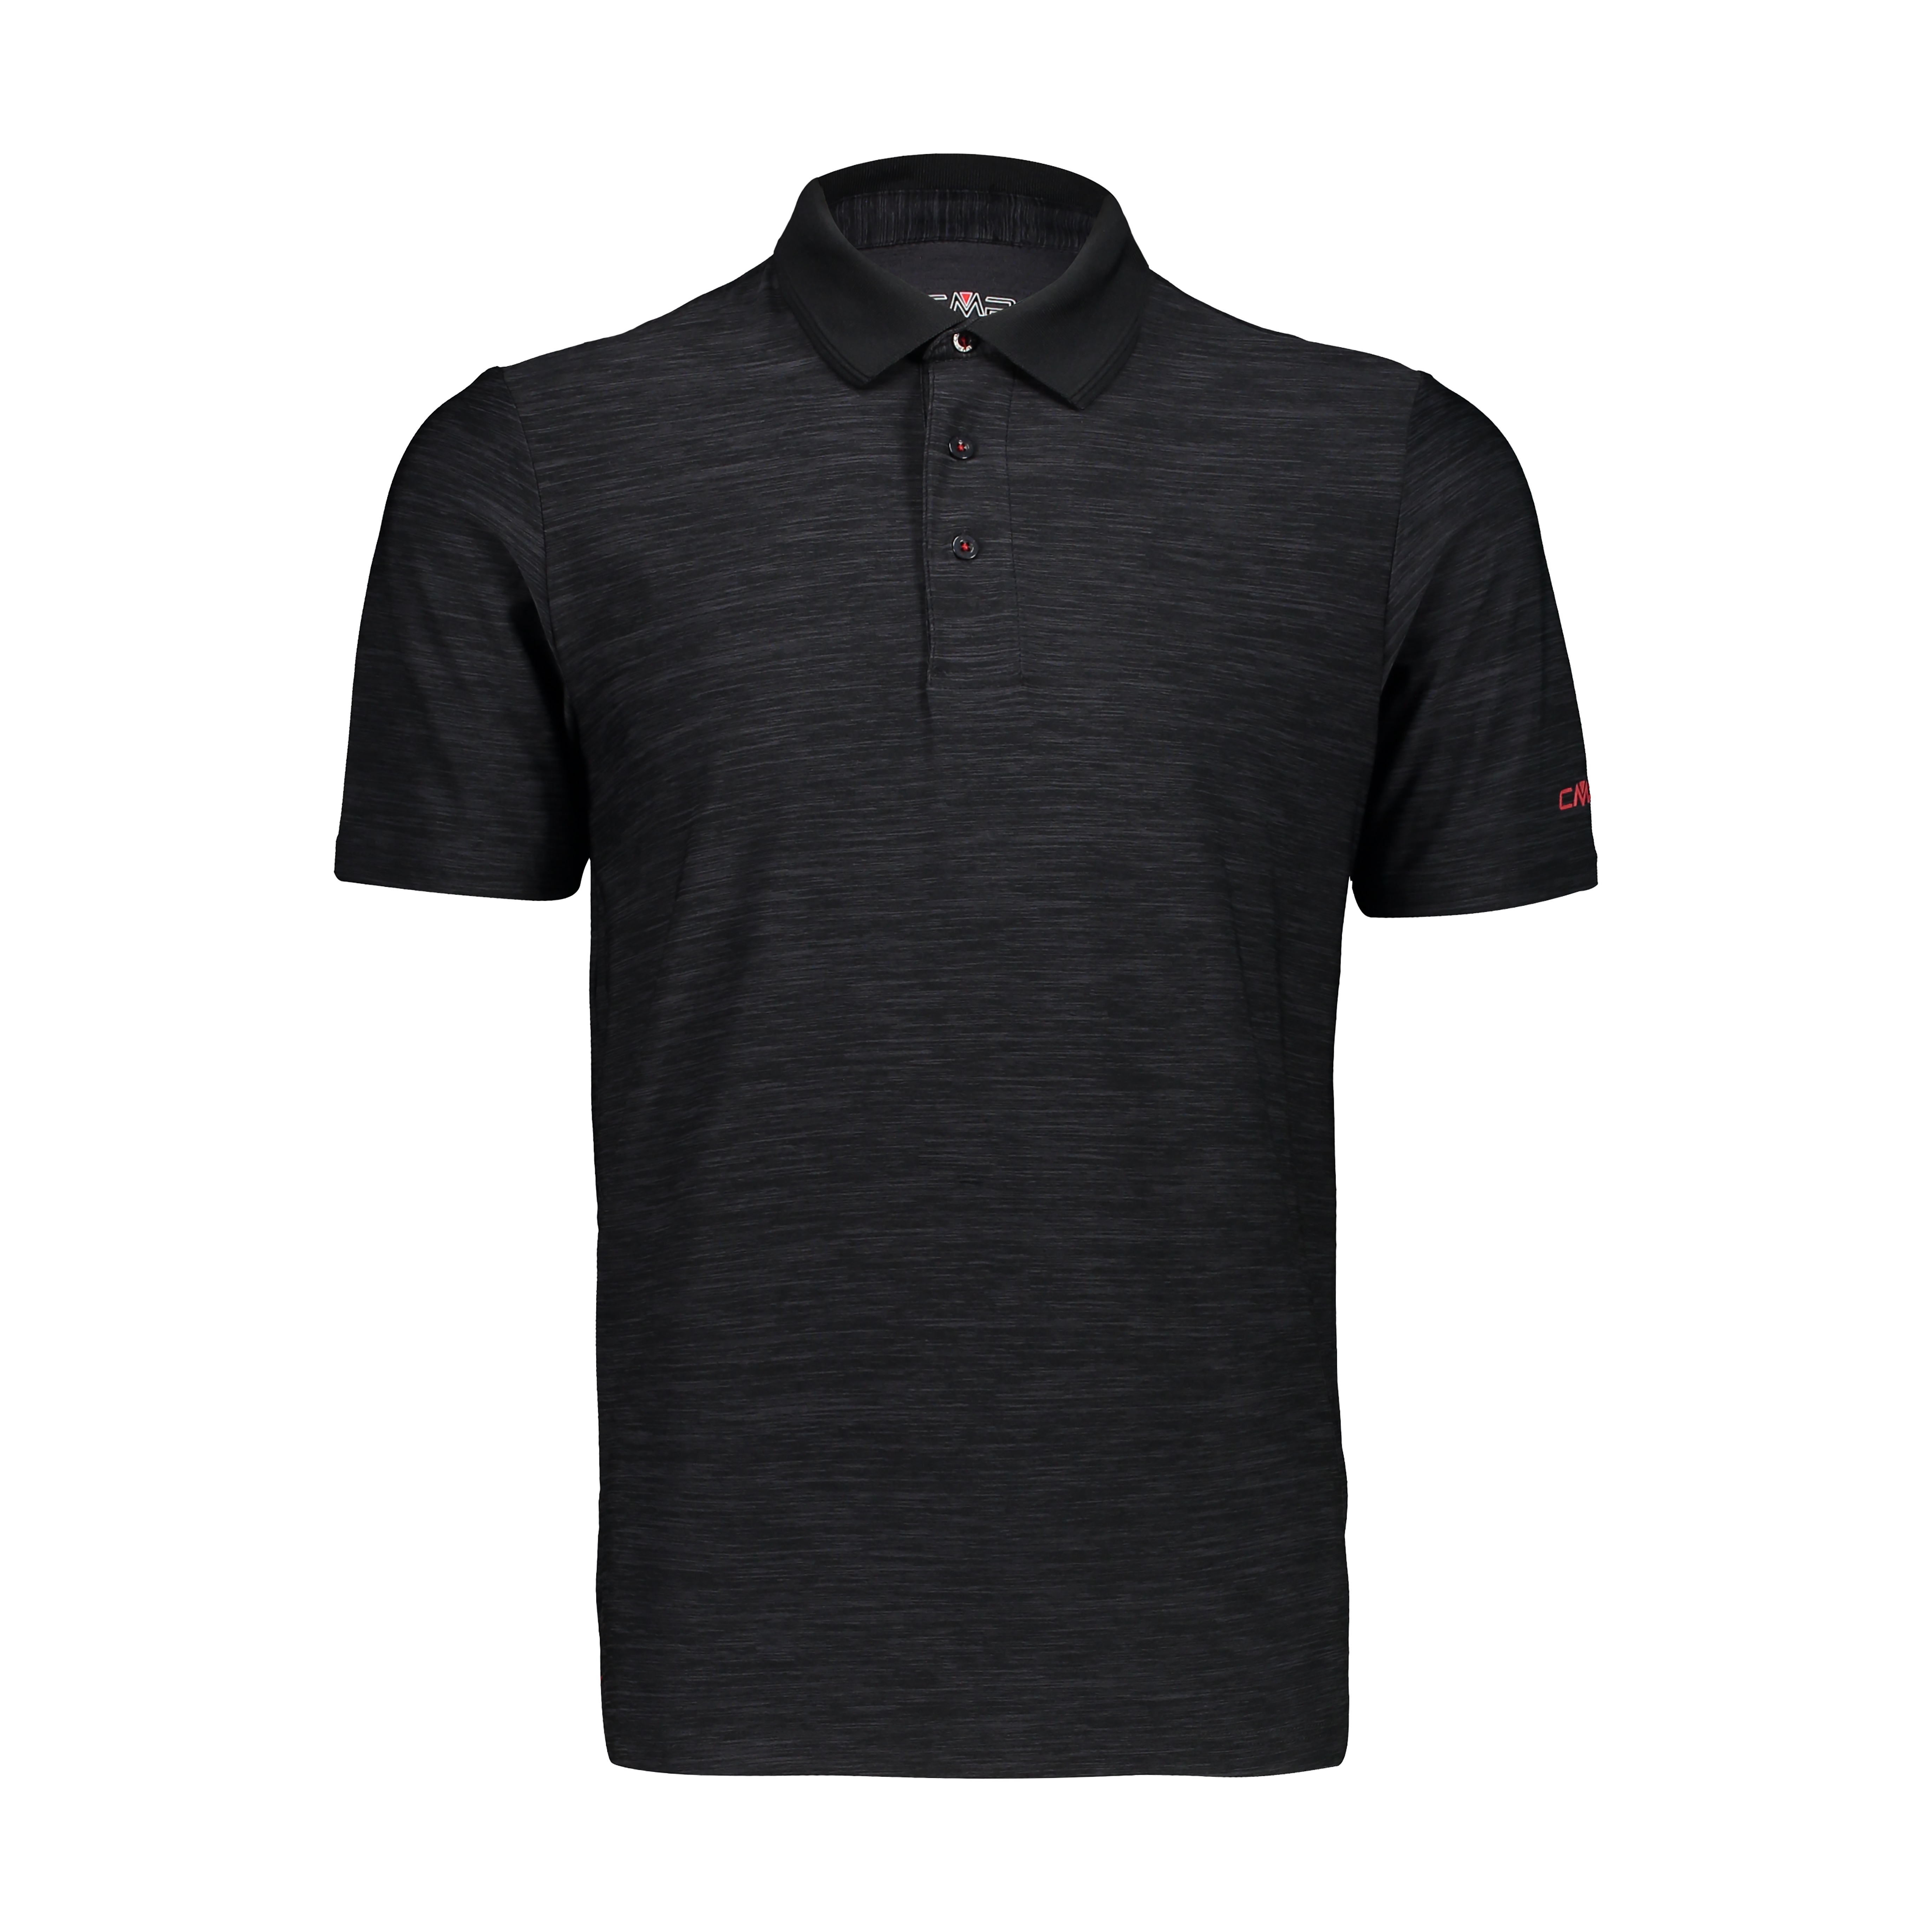 Dry Function Stretch Polo